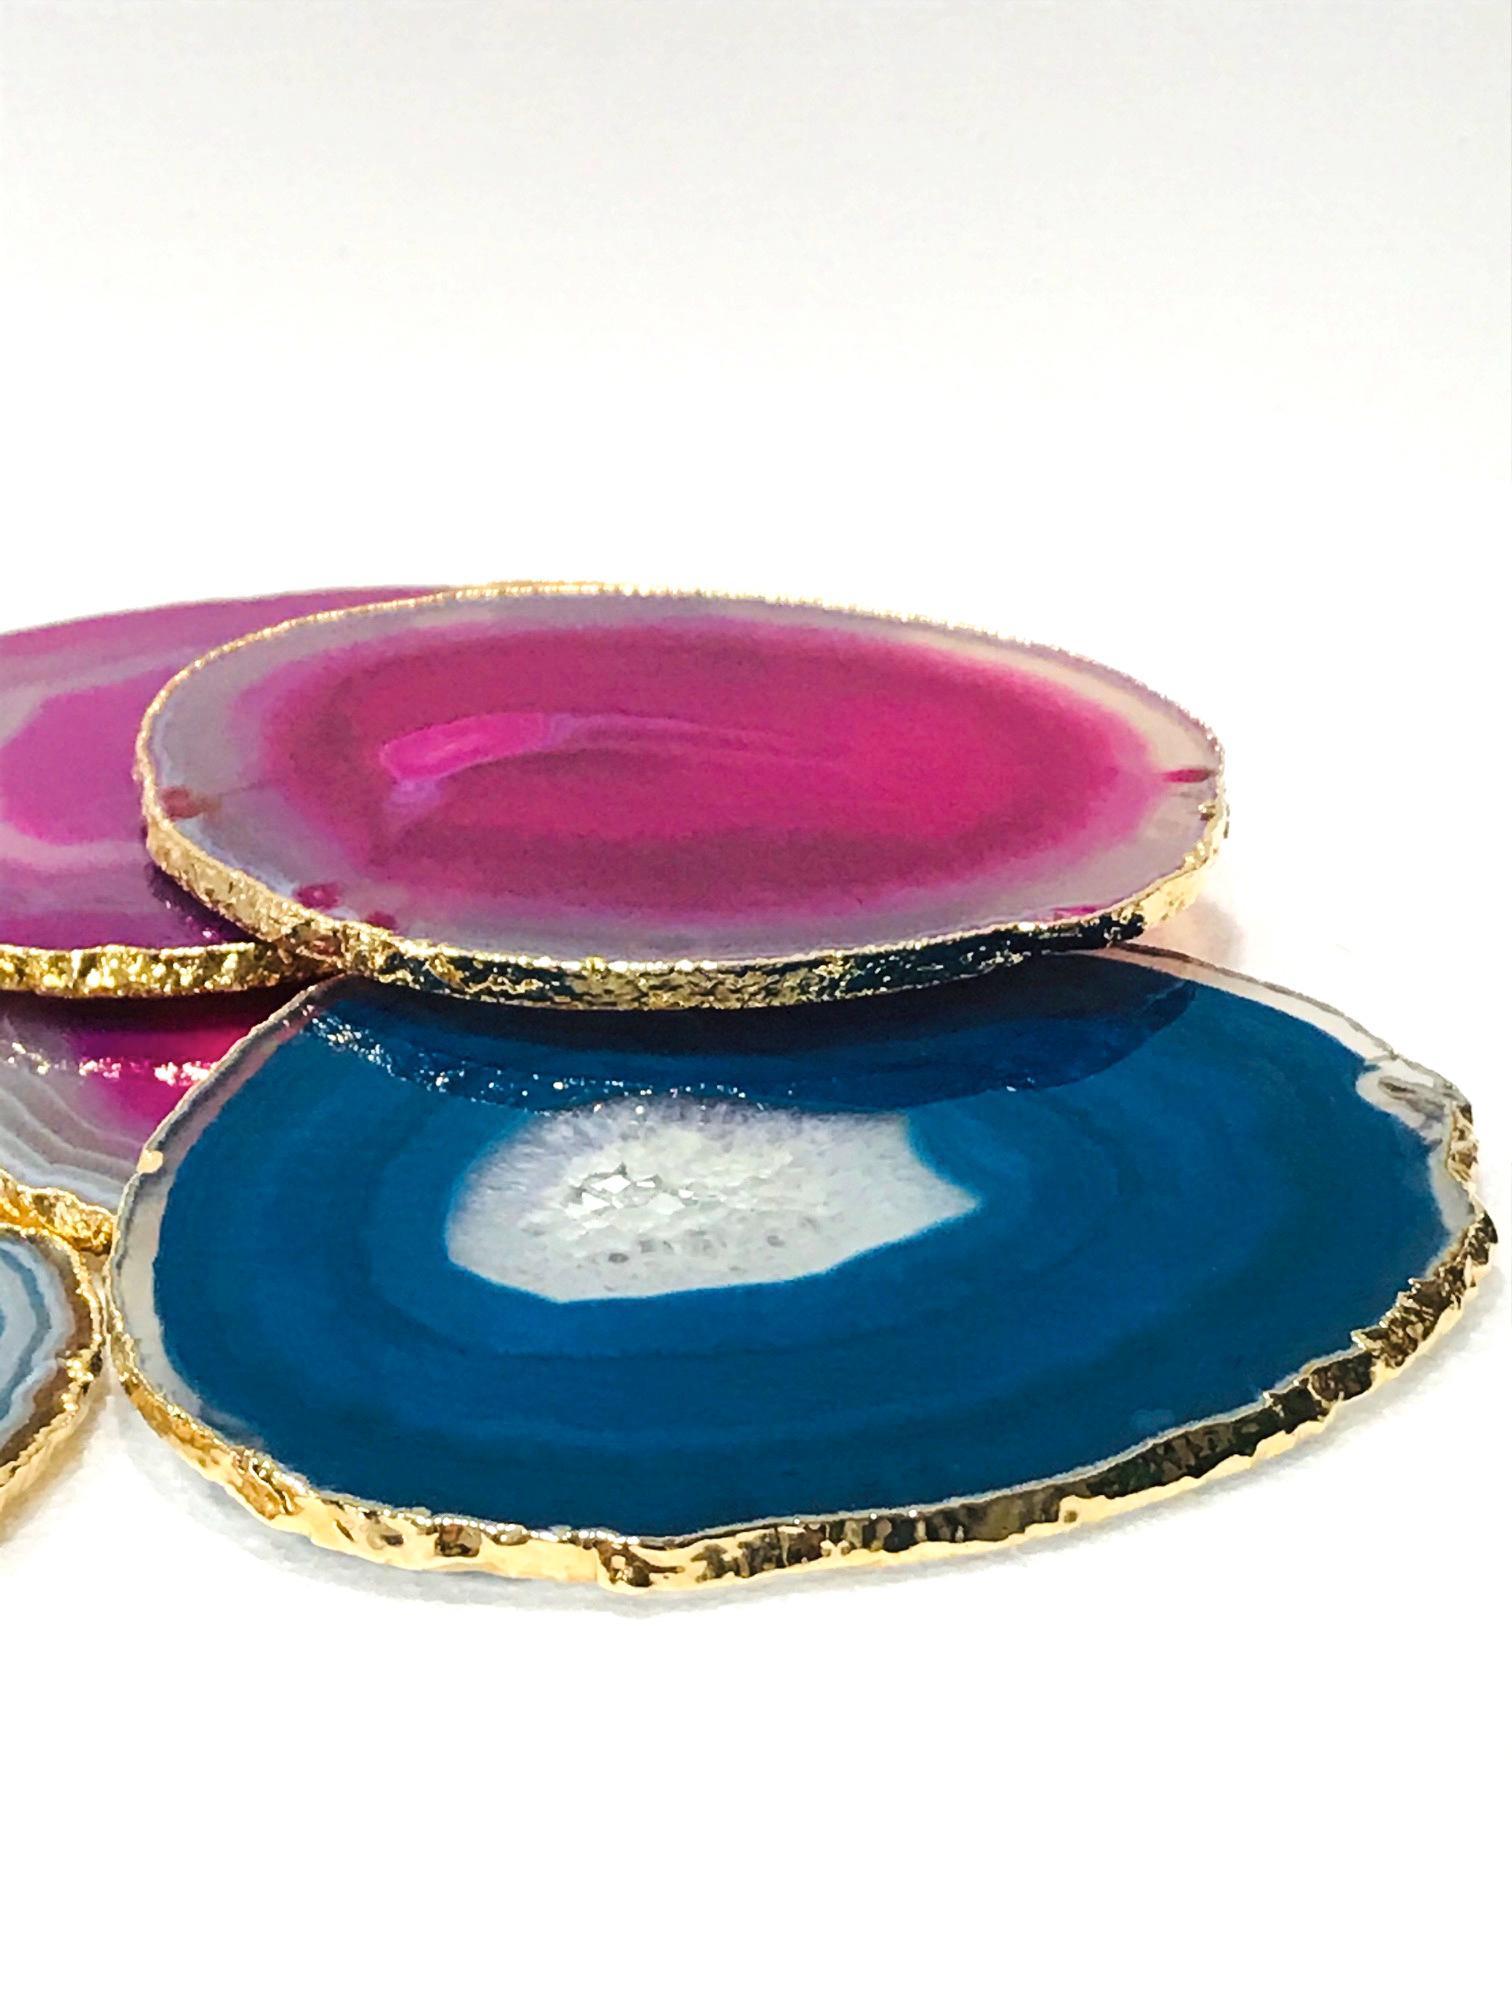 Semi-Precious Gemstone Coasters in Pink and Turquoise with 24k Gold Trim, Set /8 In Excellent Condition For Sale In Fort Lauderdale, FL